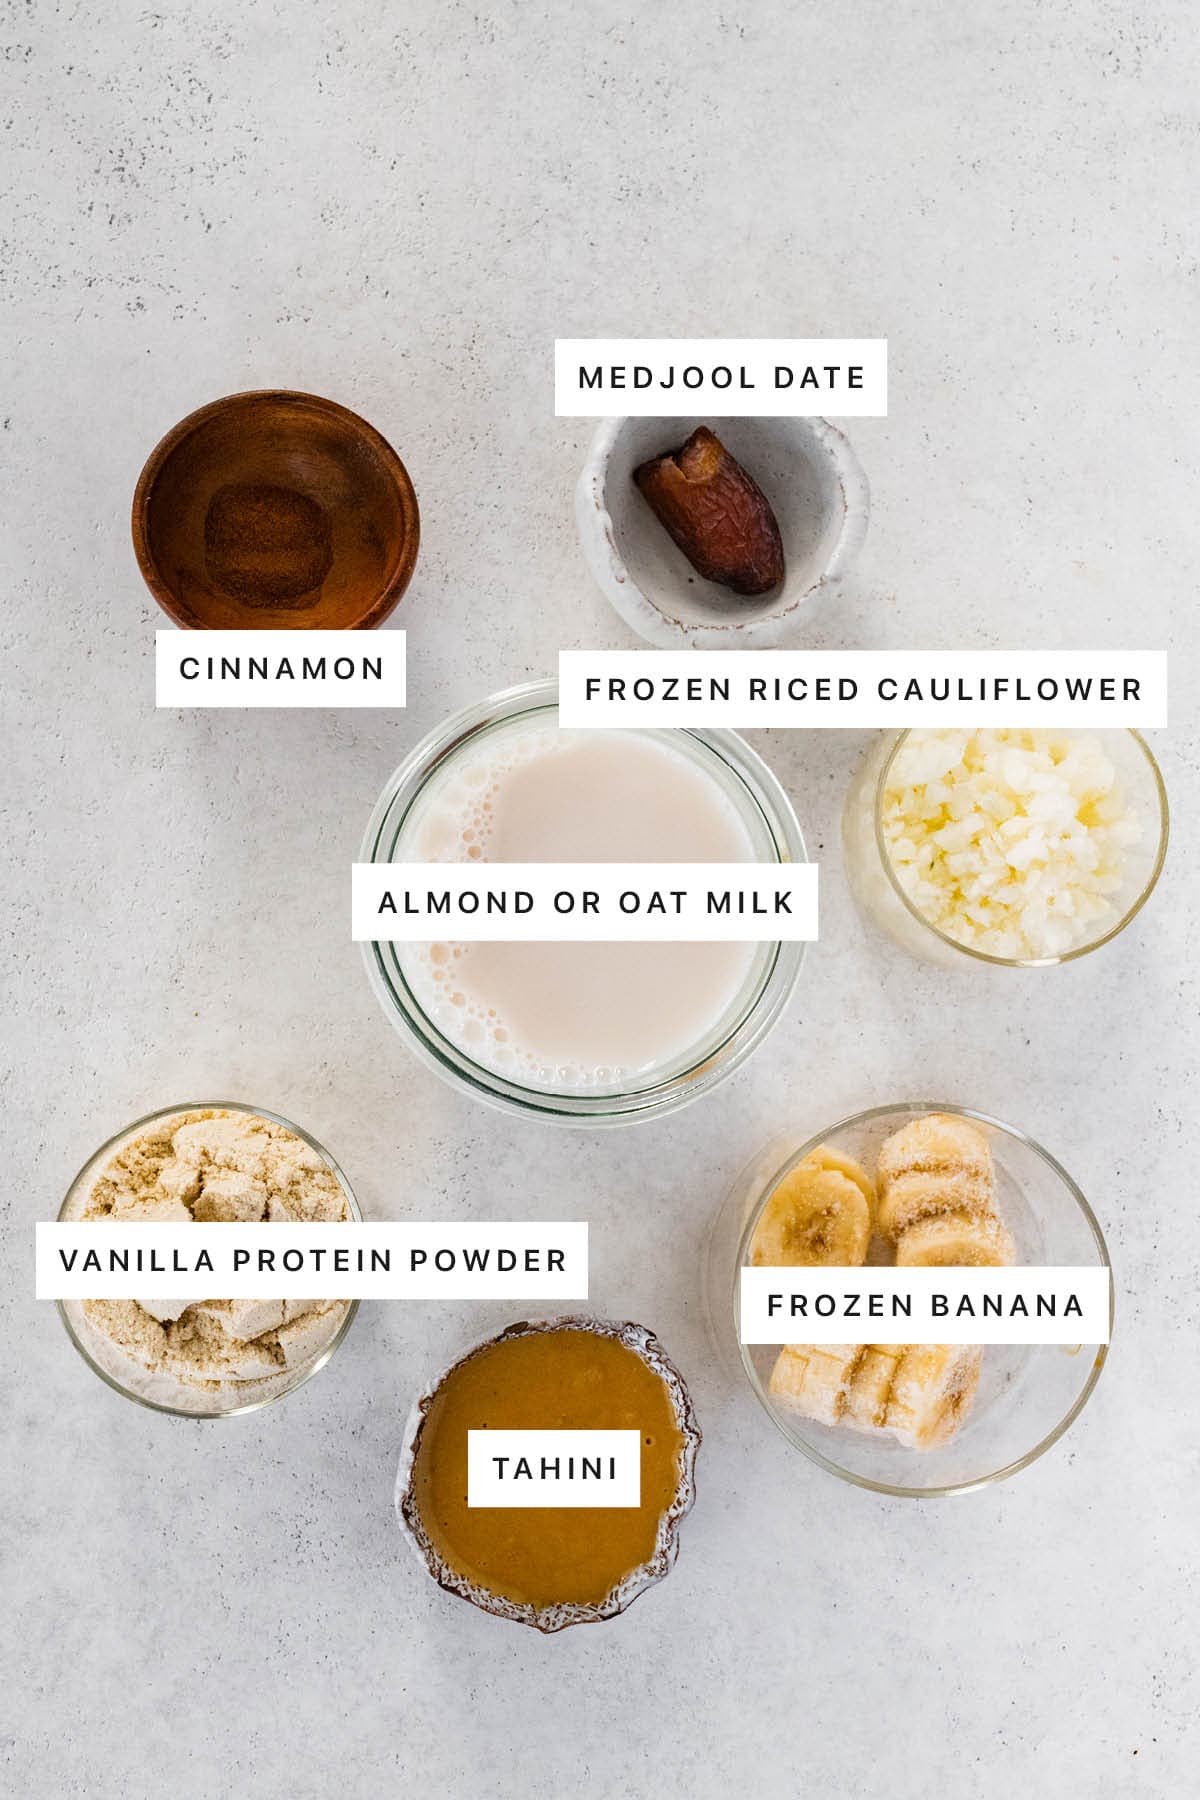 Ingredients measured out to make a Tahini Smoothie: cinnamon, medjool date, frozen riced cauliflower, almond or oat milk, vanilla protein powder, tahini and frozen banana.